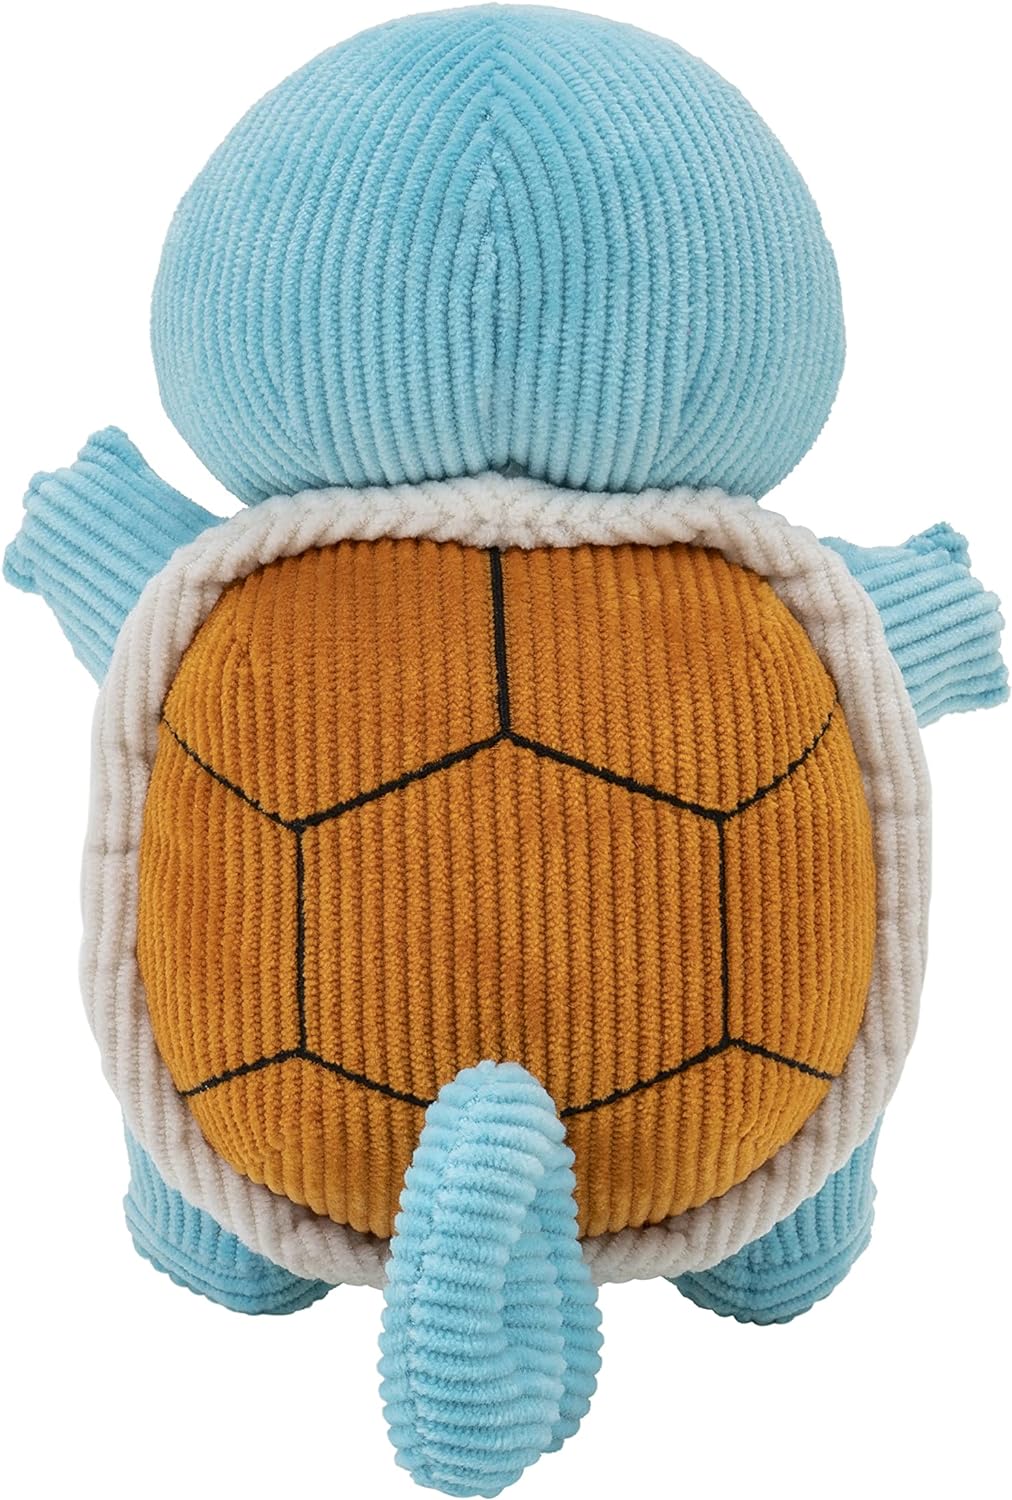 Pokemon Select 8Inch SQUIRTLE Corduroy Soft Plush Toy